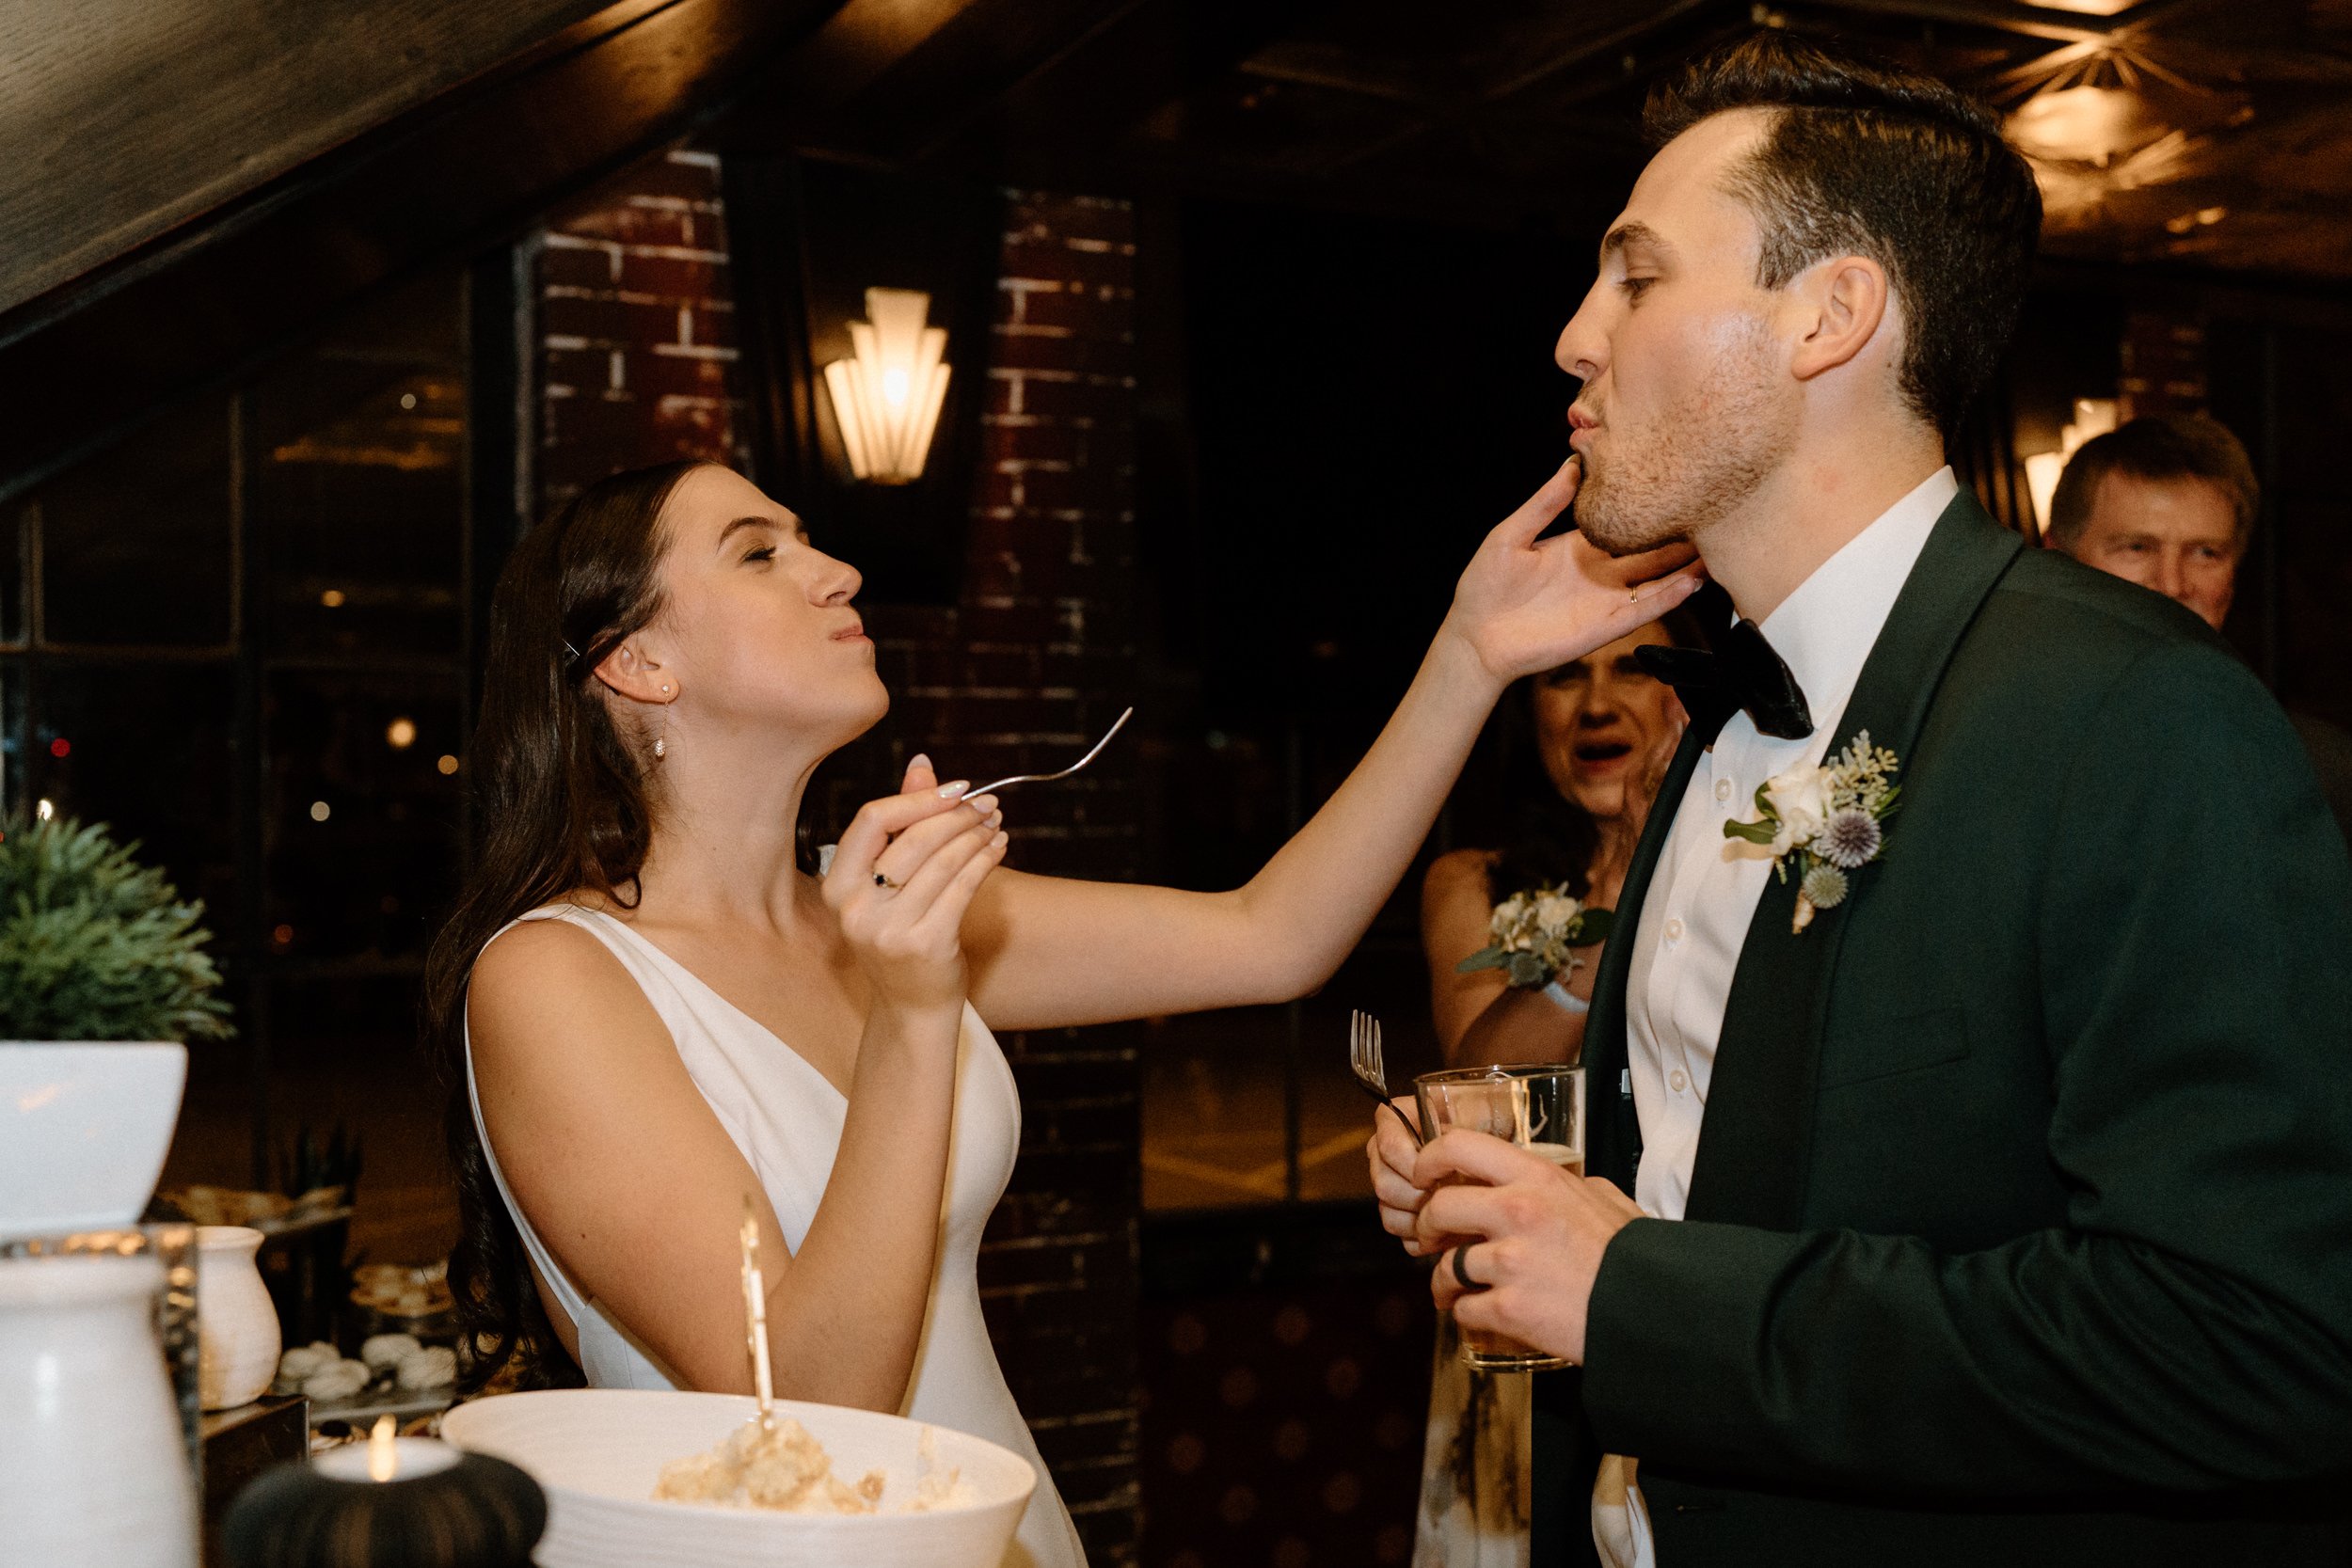 The bride feeds a piece of ice cream to the groom